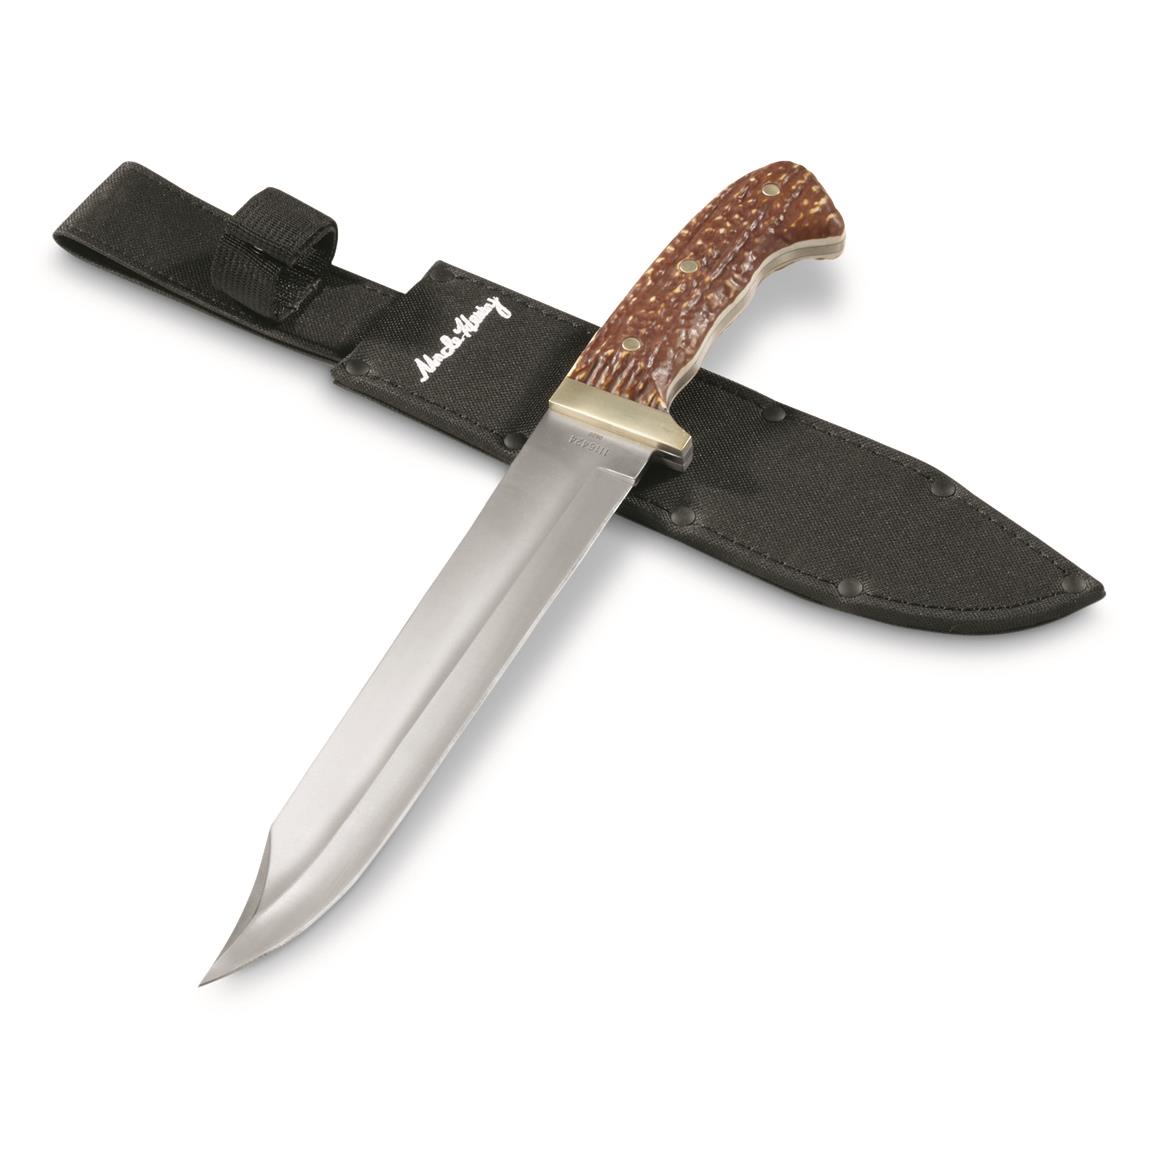 Uncle Henry Bowie Full Tang Fixed Blade Knife